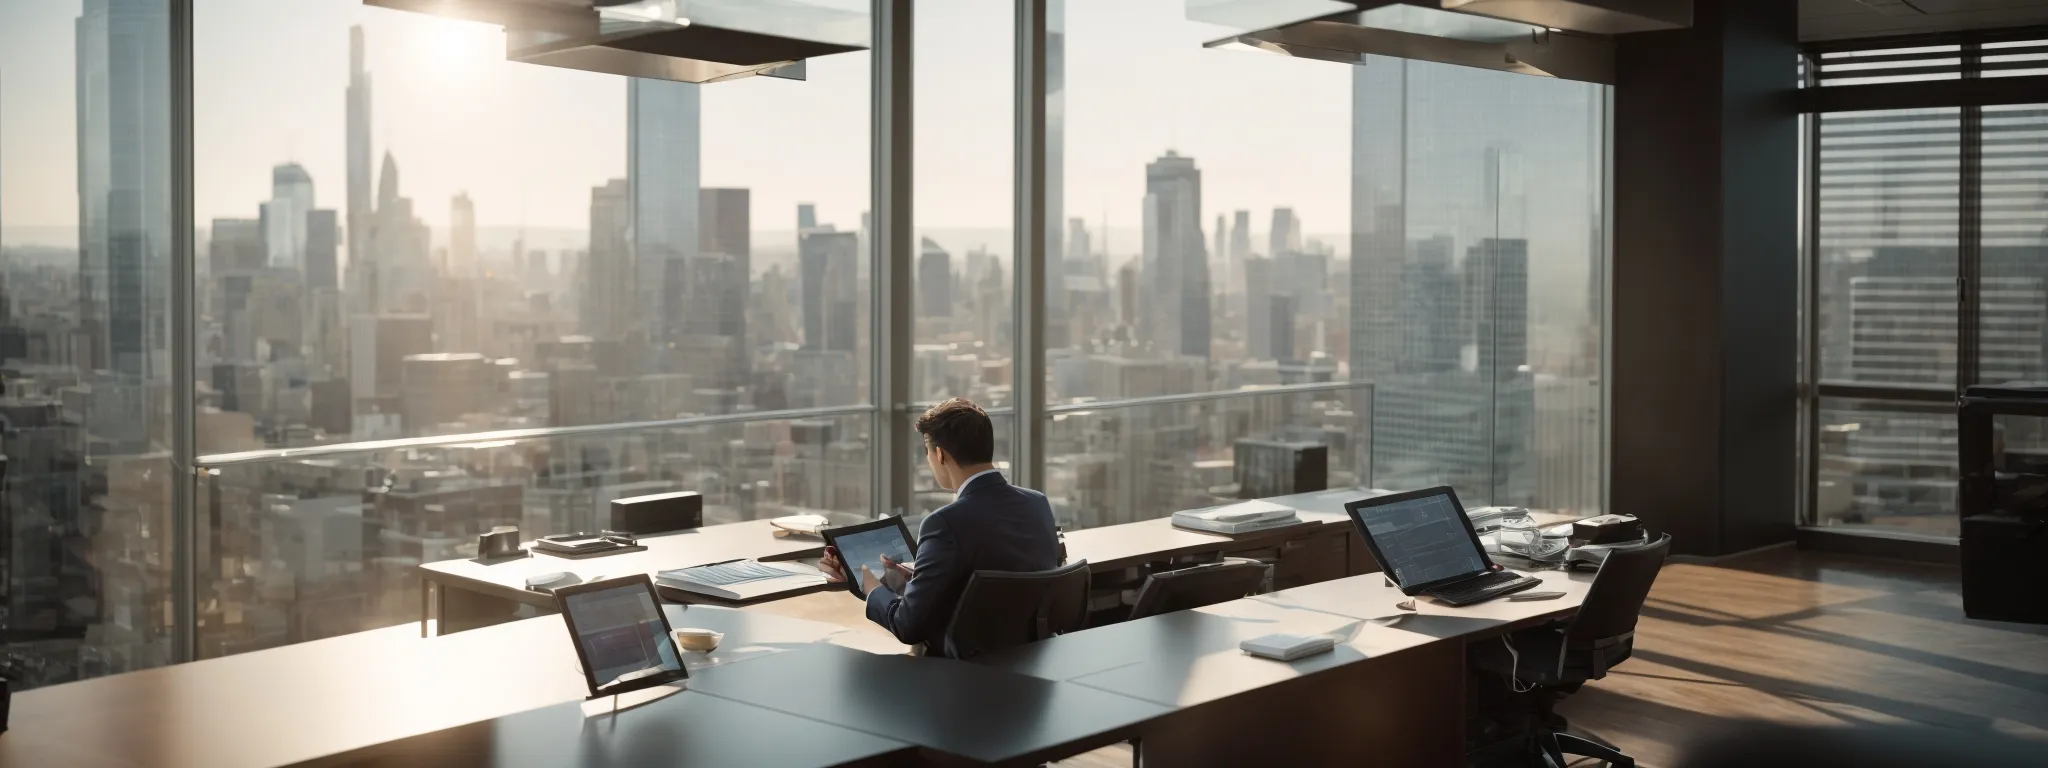 a business professional analyzes charts on a tablet in a modern, sunlit office with cityscape views.